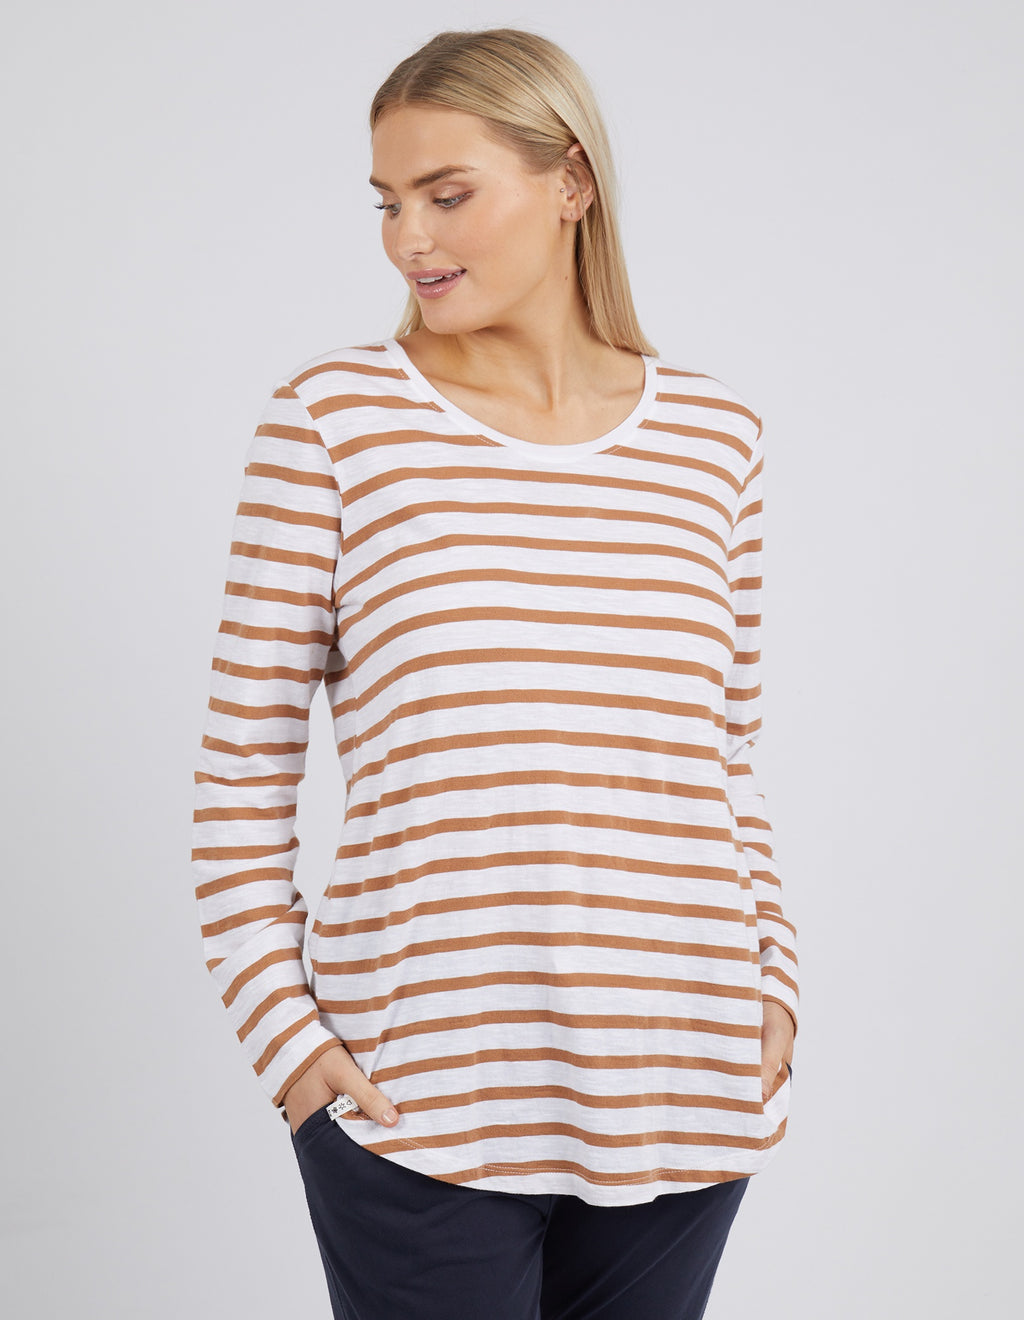 Elm Scoop L/S Tee - White and Butterscotch Stripe